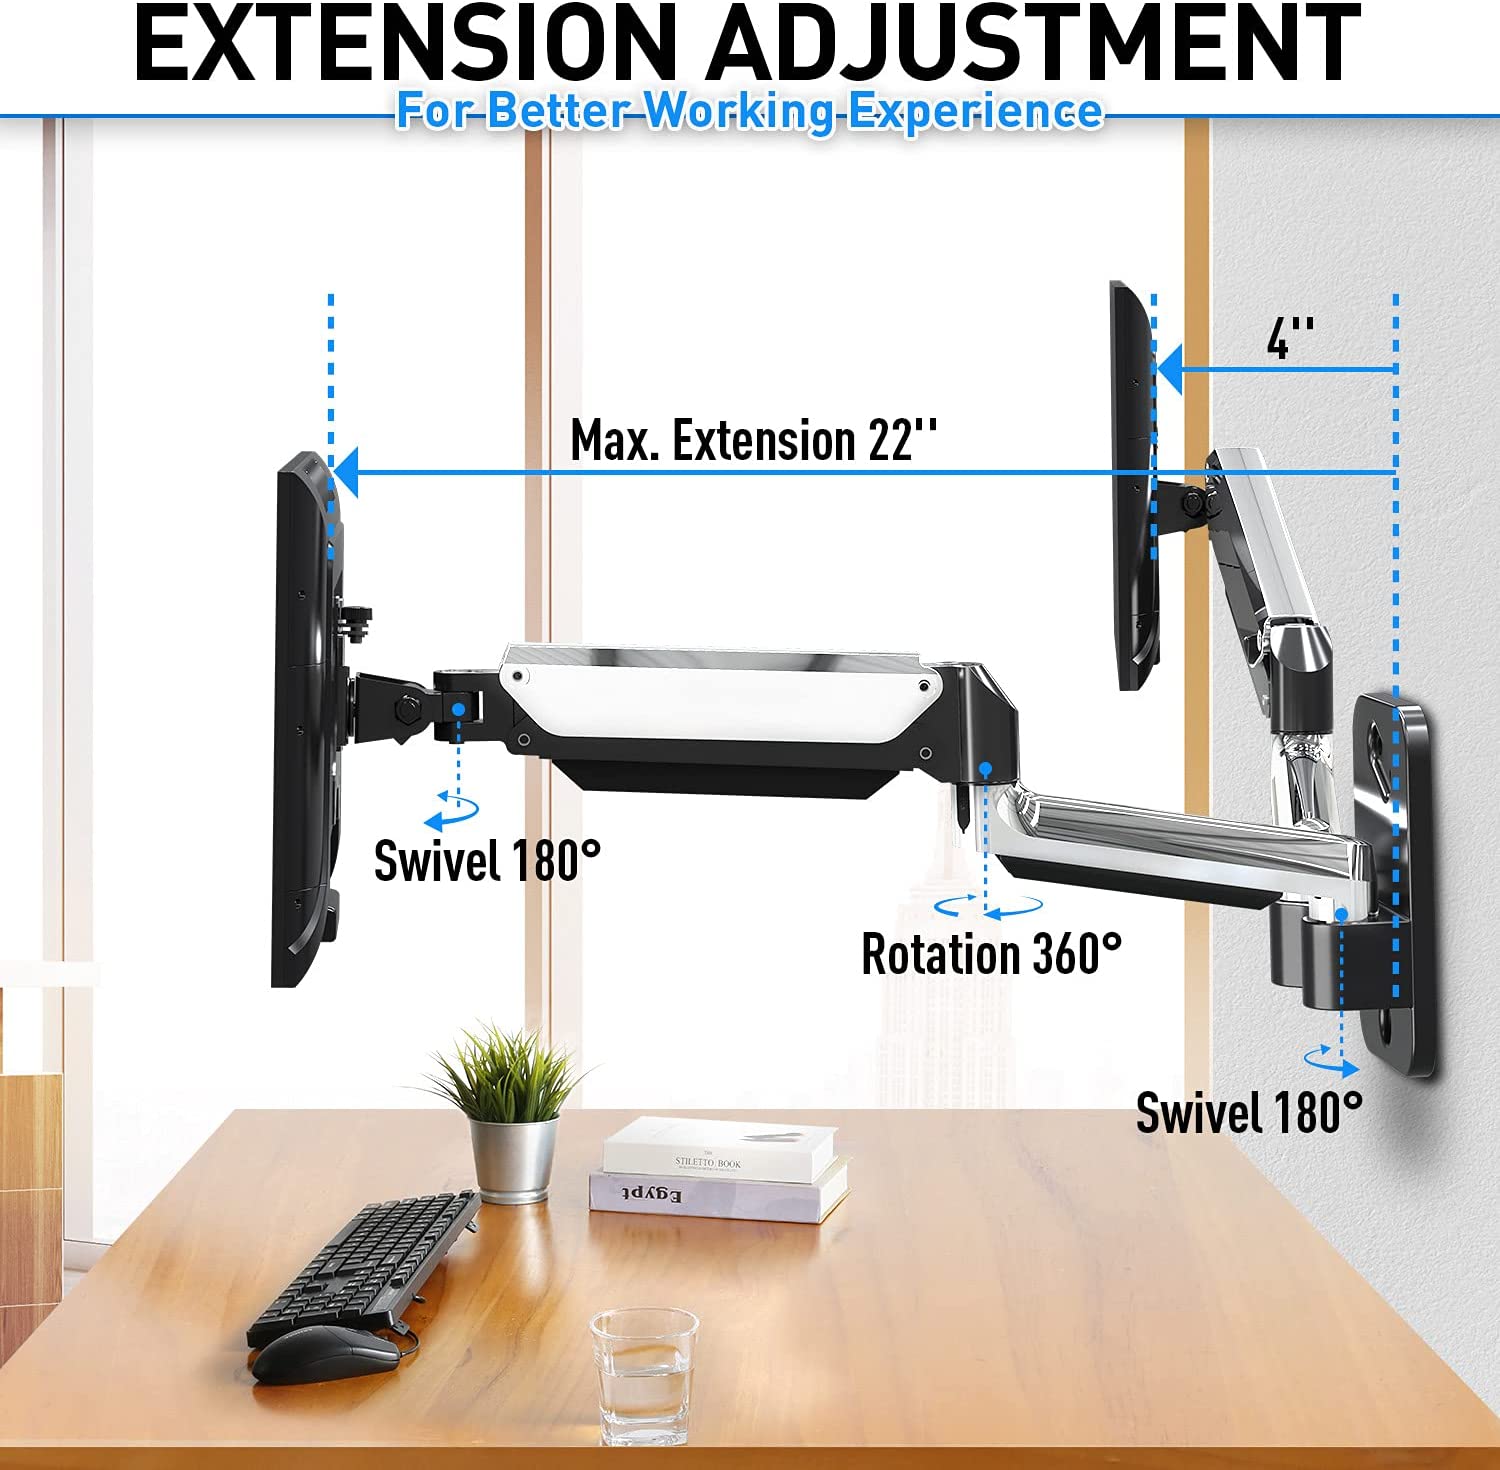 MOUNTUP Dual Monitor Wall Mount for 2 Max 32 Inch Computer Screen, Silver Polished Aluminium Full Motion Gas Spring Double Monitor Arm, VESA Bracket Support